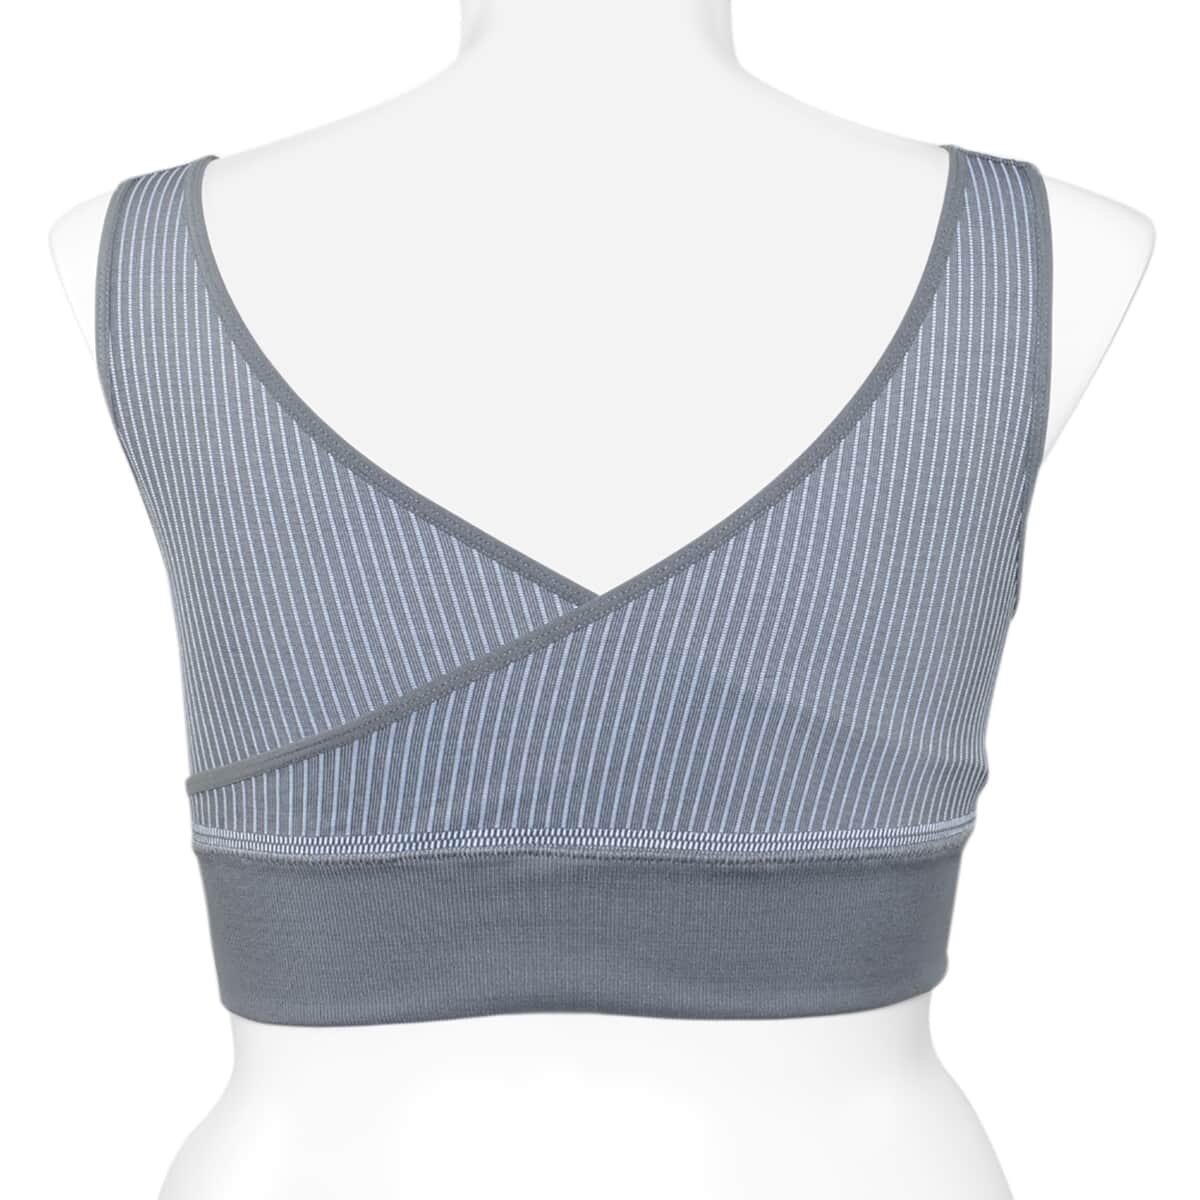 SANKOM Patent Gray Wireless Posture Support Bra with Bamboo Fibers - L/XL image number 3